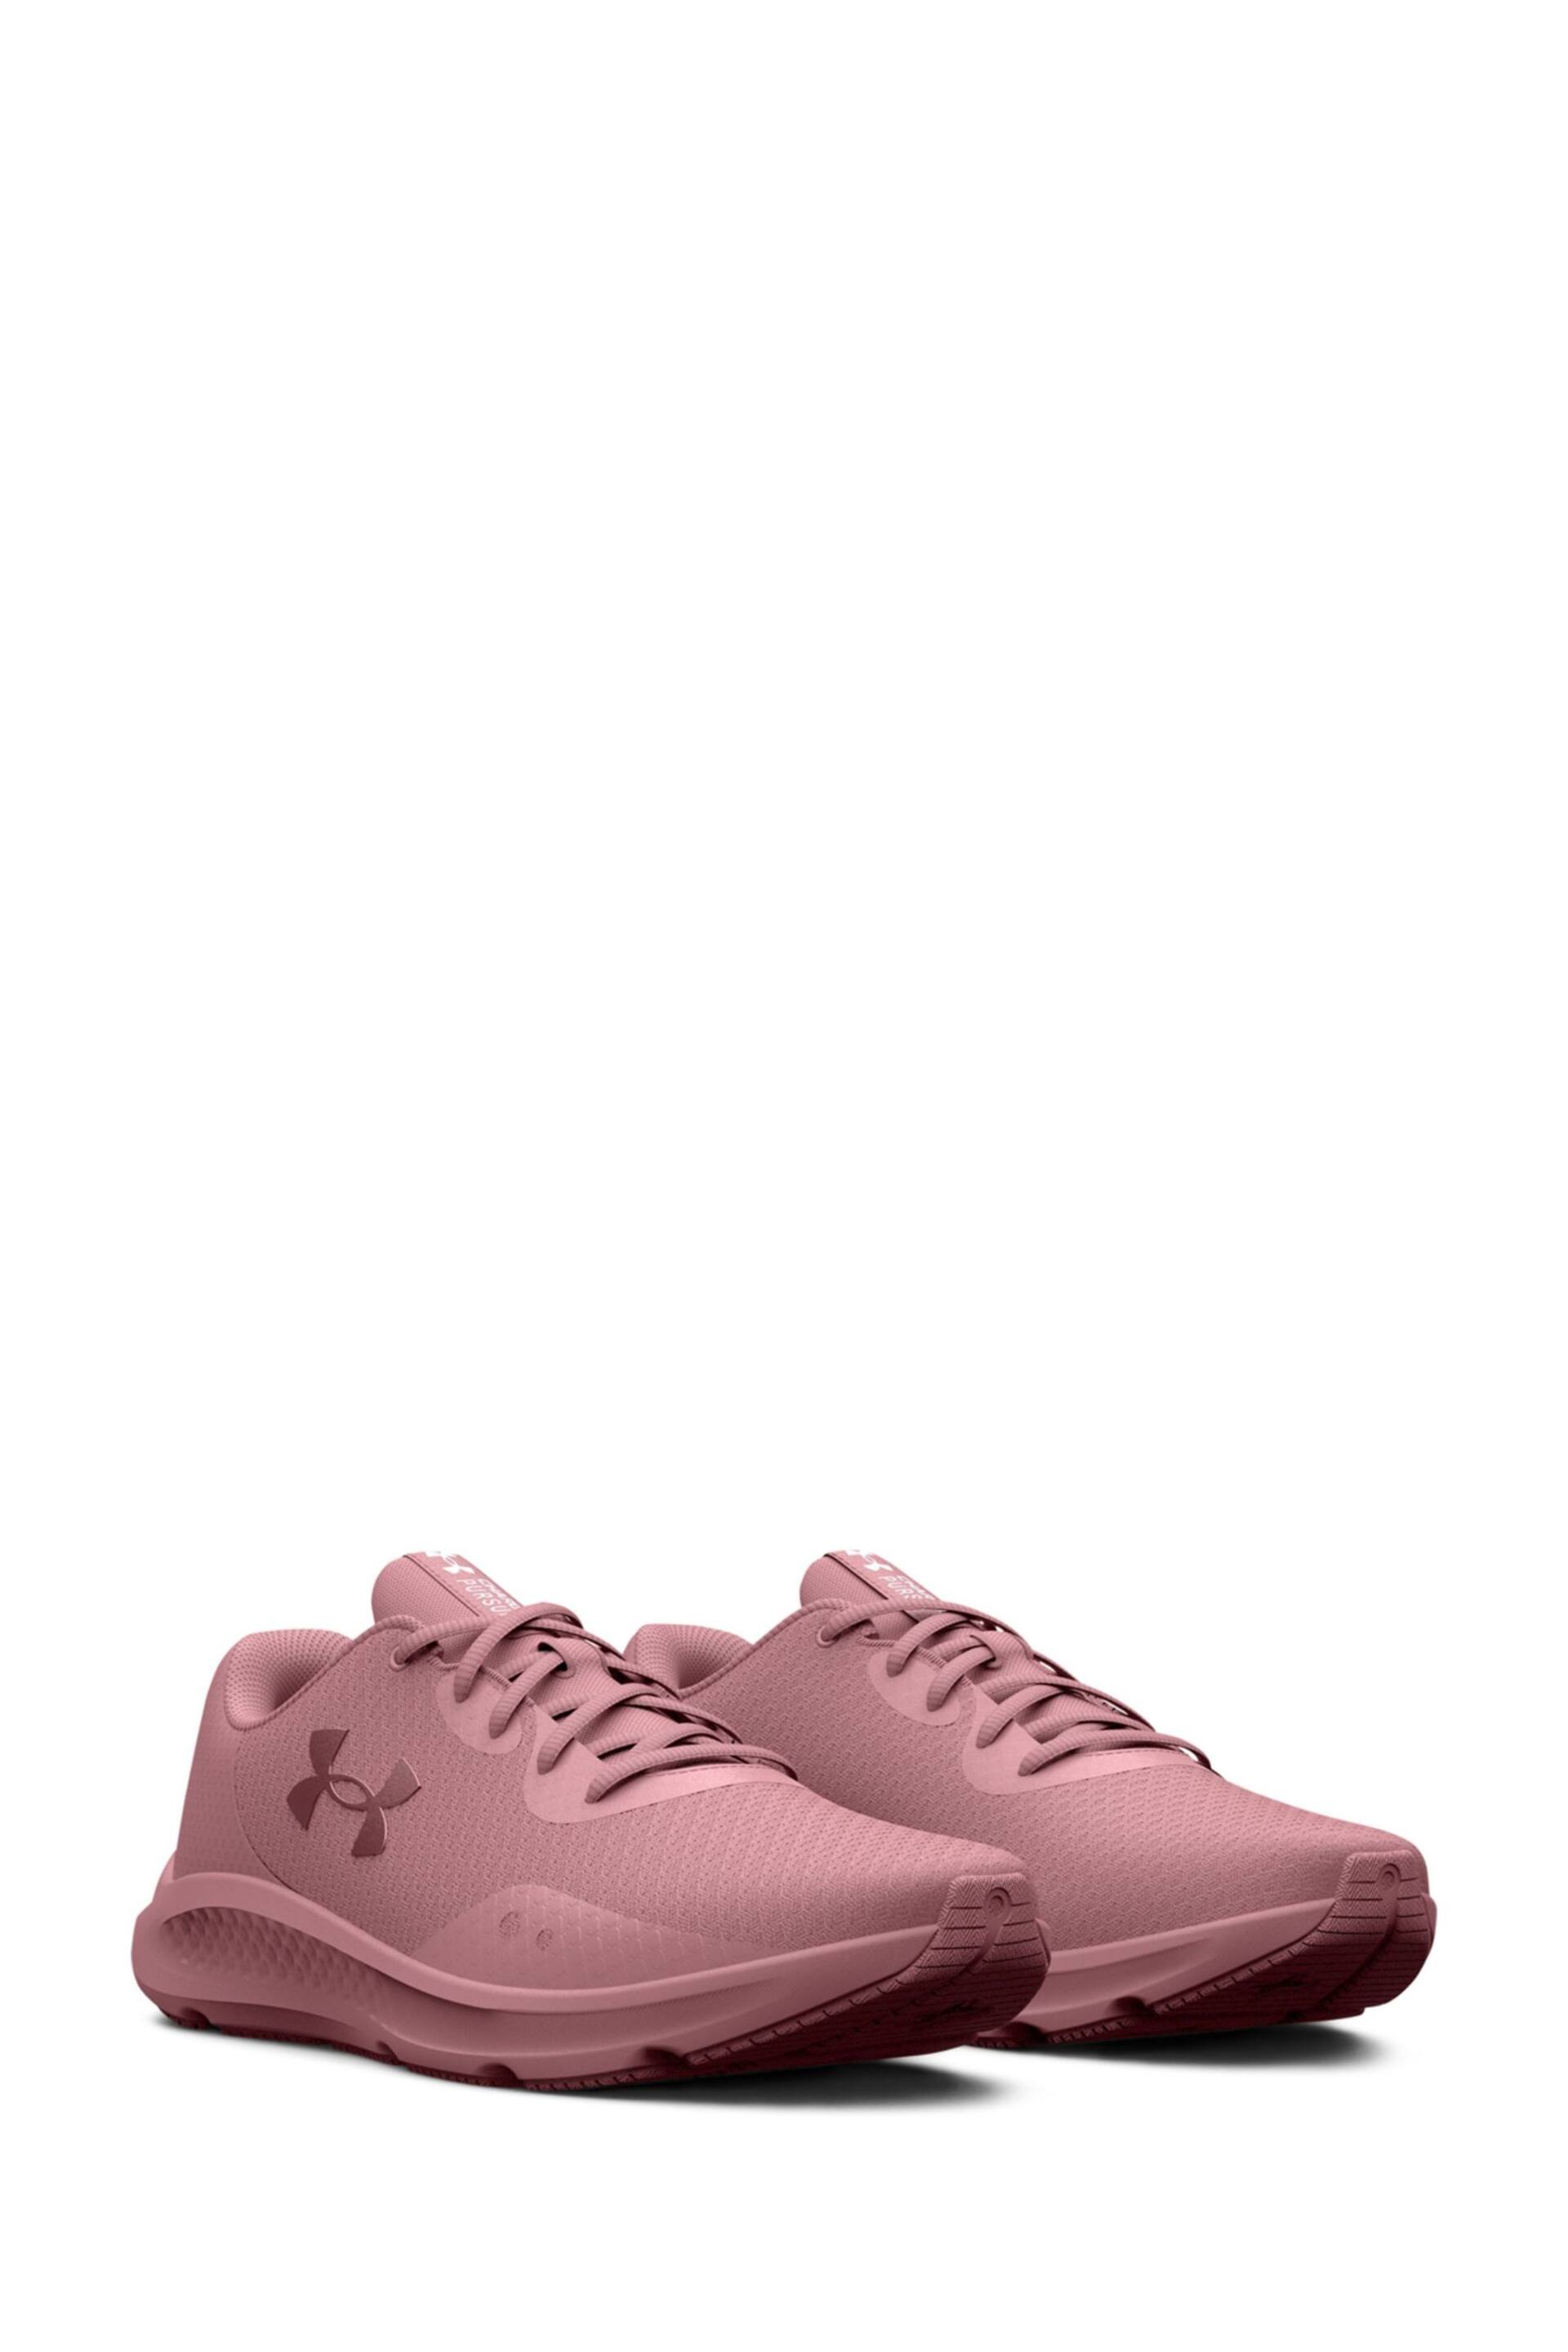 Under Armour Pink Charged Pursuit 3 Trainers - Image 3 of 5